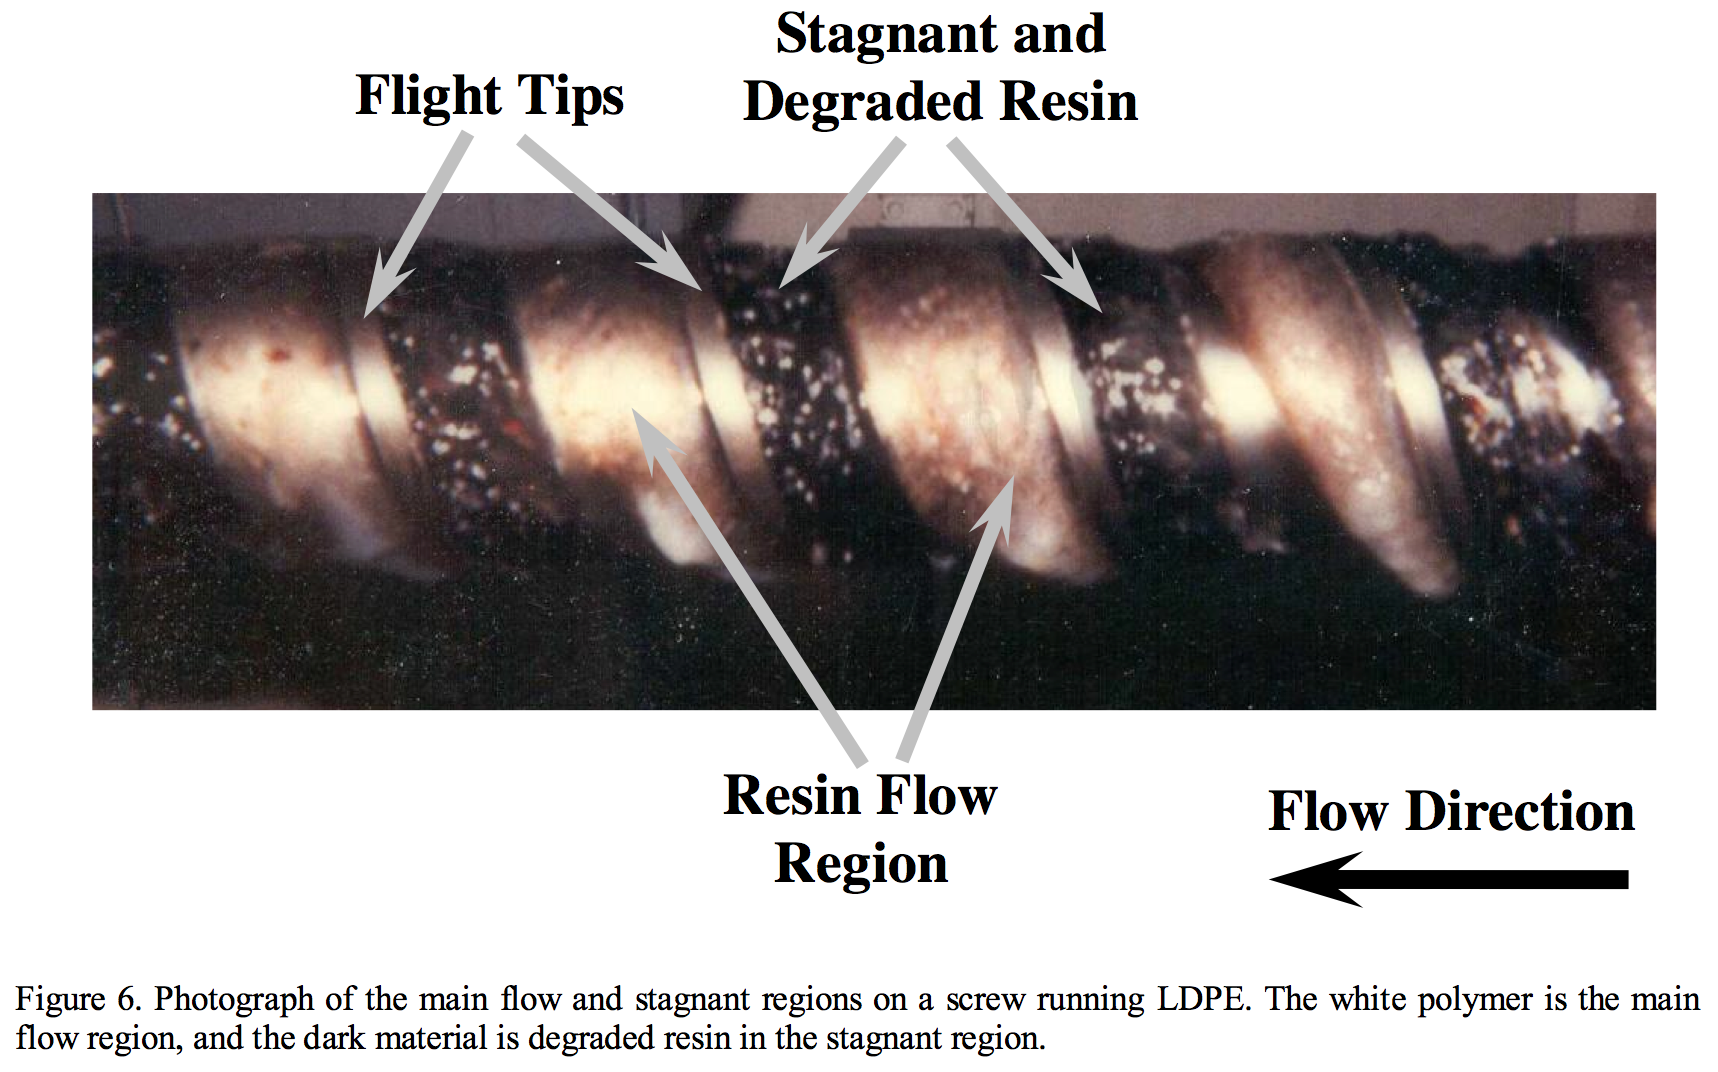 Main flow and stagnant regions on screw running LDPE